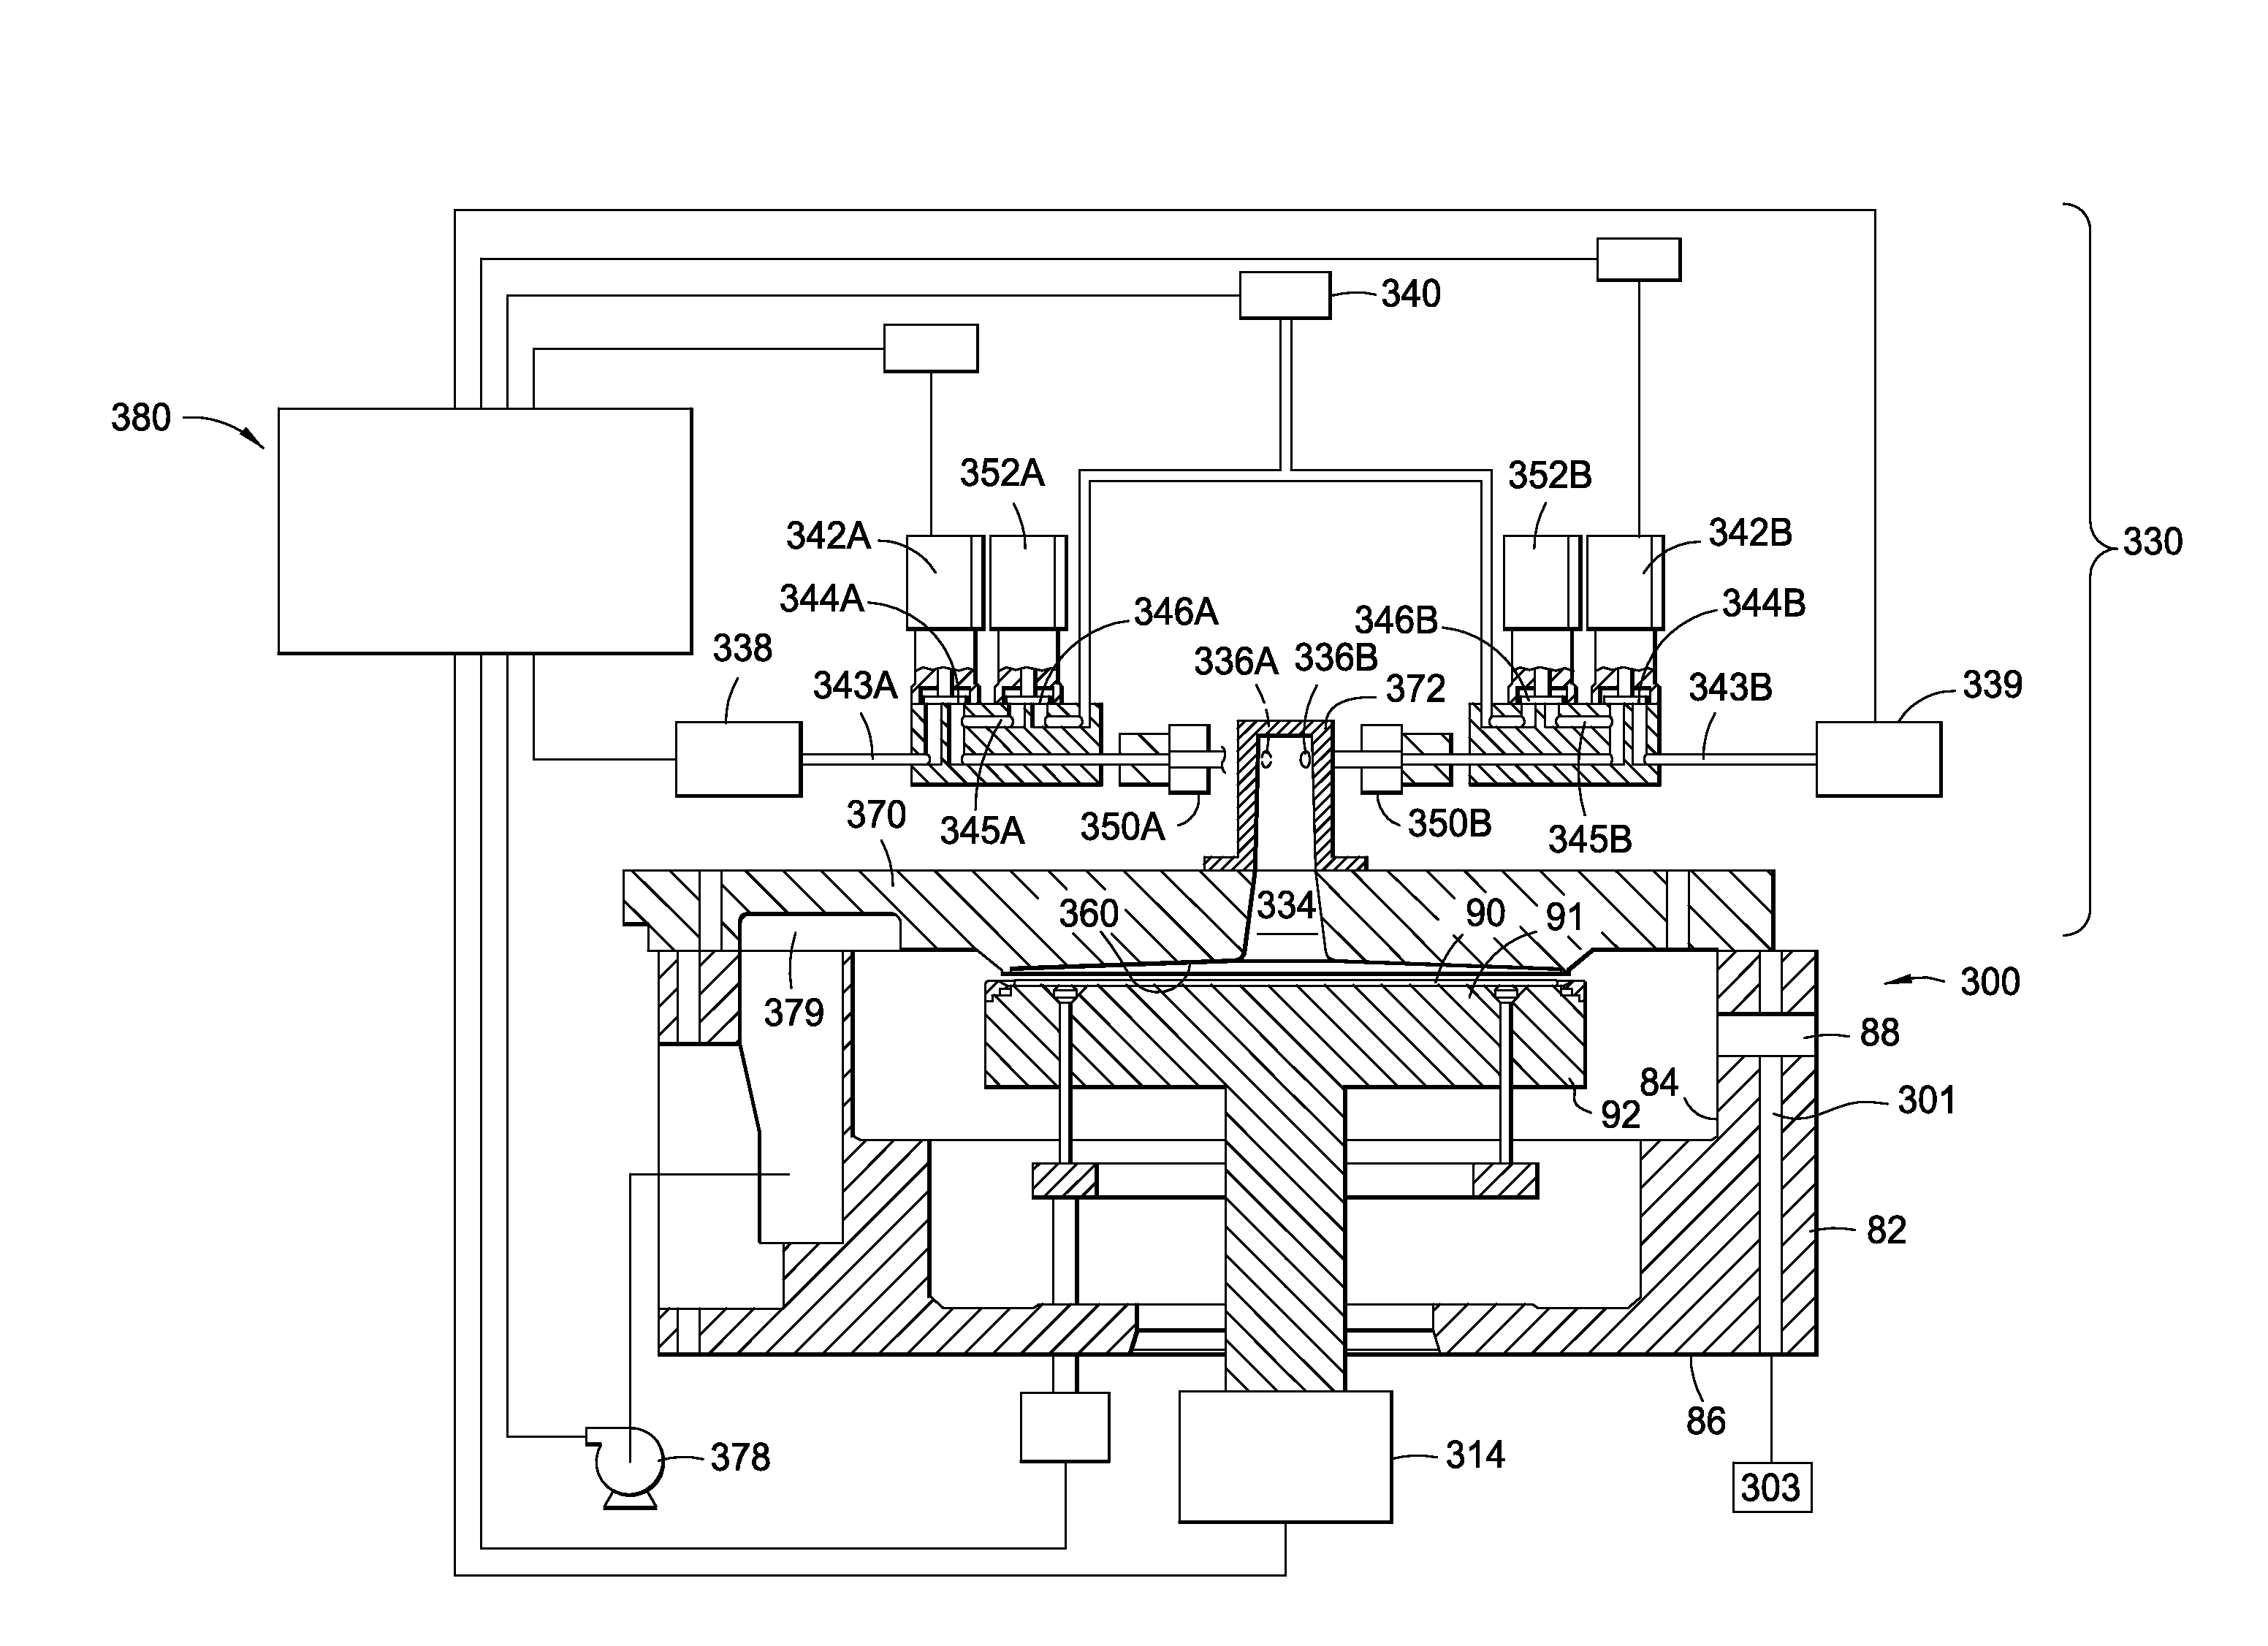 Air gap structure integration using a processing system